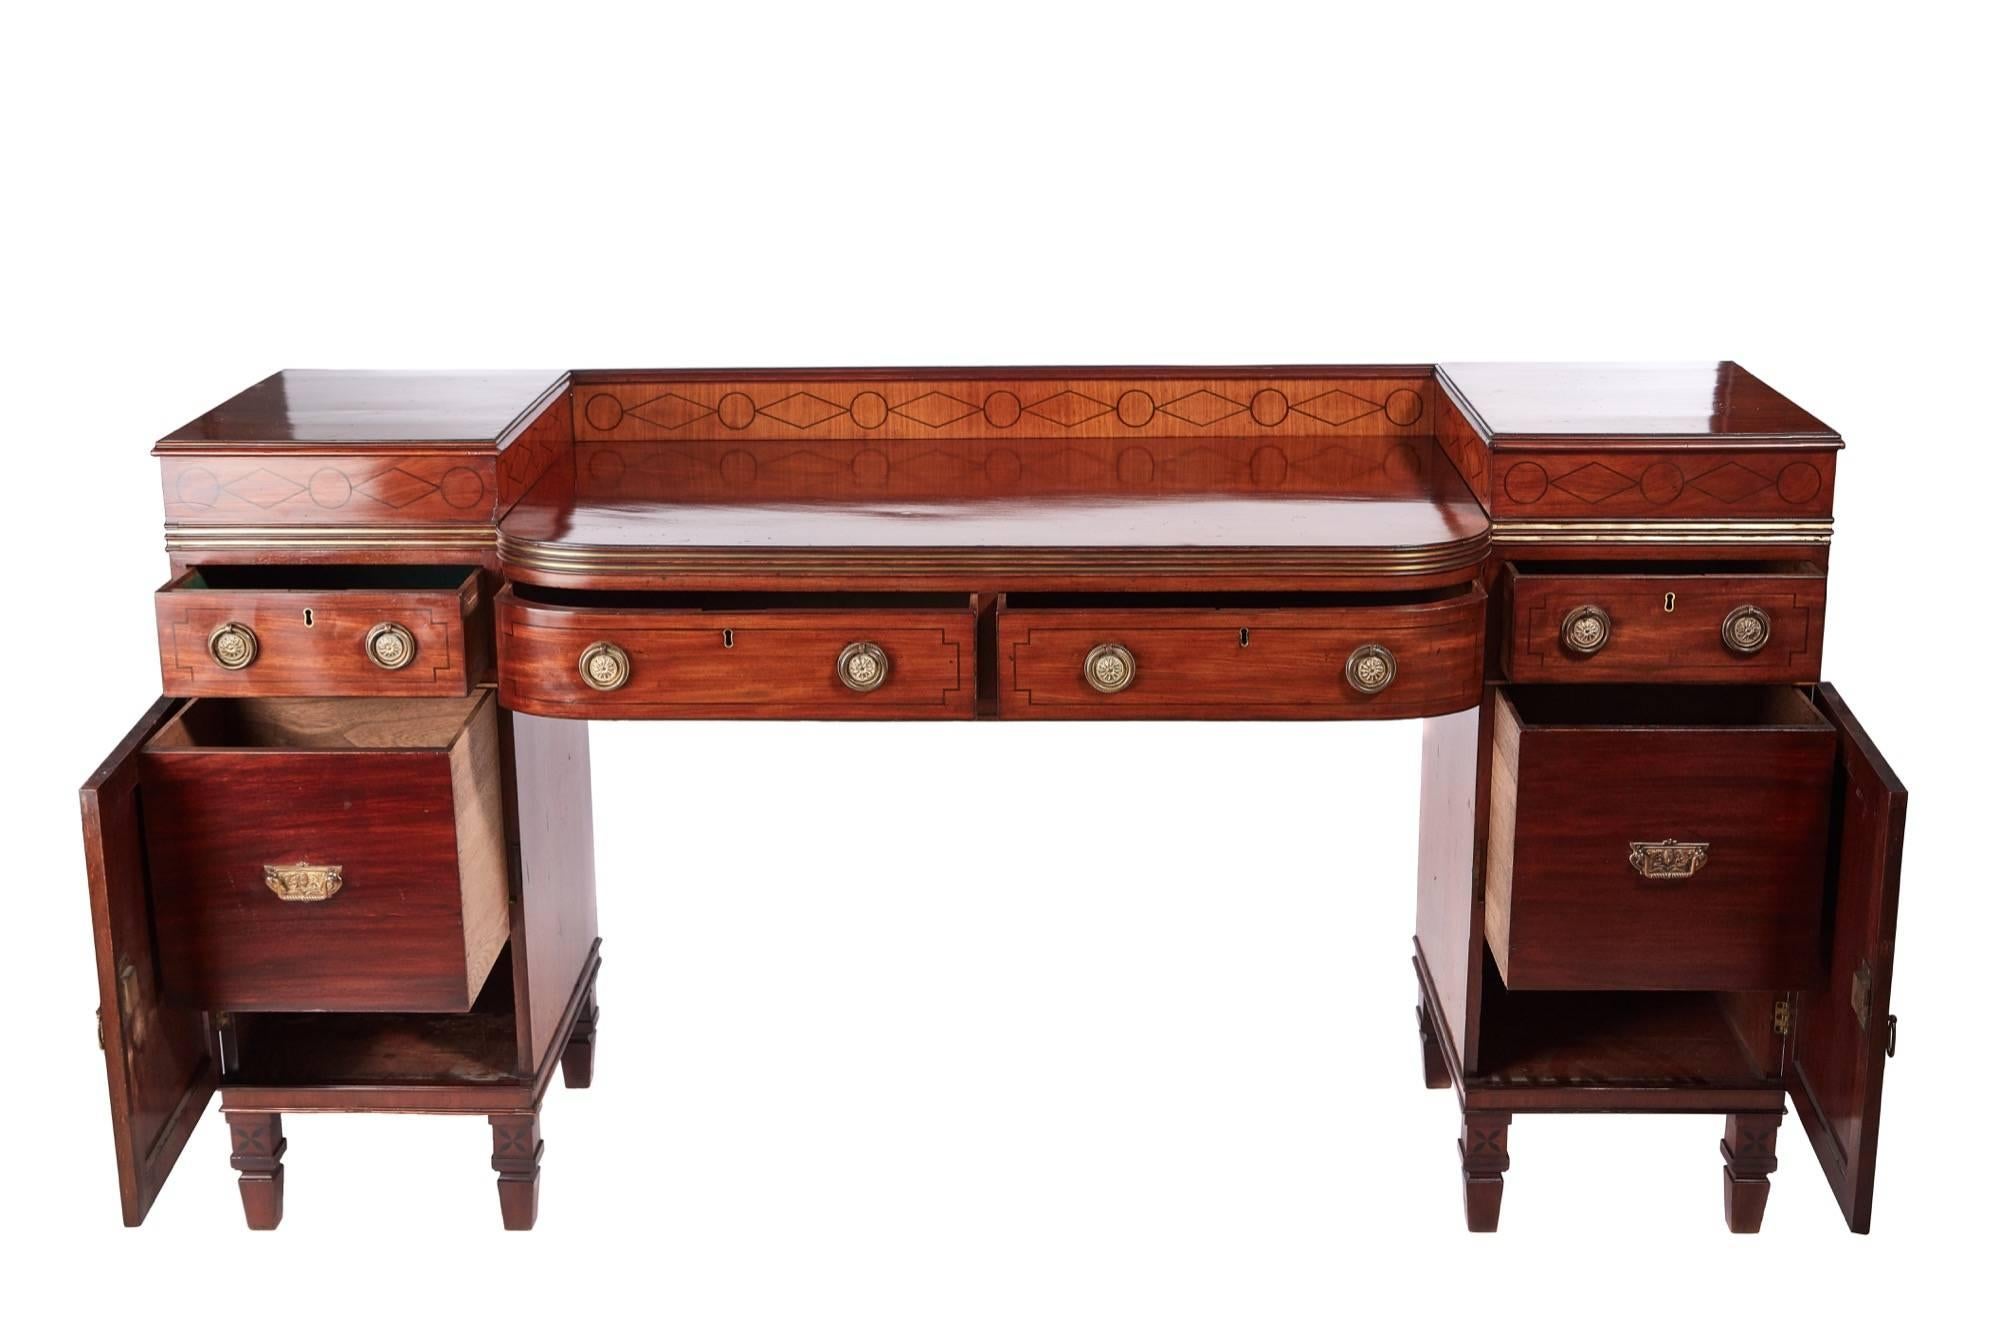 Outstanding regency mahogany brass inlaid sideboard, with a quality mahogany top, two shaped centre drawers with brass inlay and a inlaid satinwood back, two lovely pedestals inlaid with brass and satinwood to the frieze, two lovely inlaid mahogany